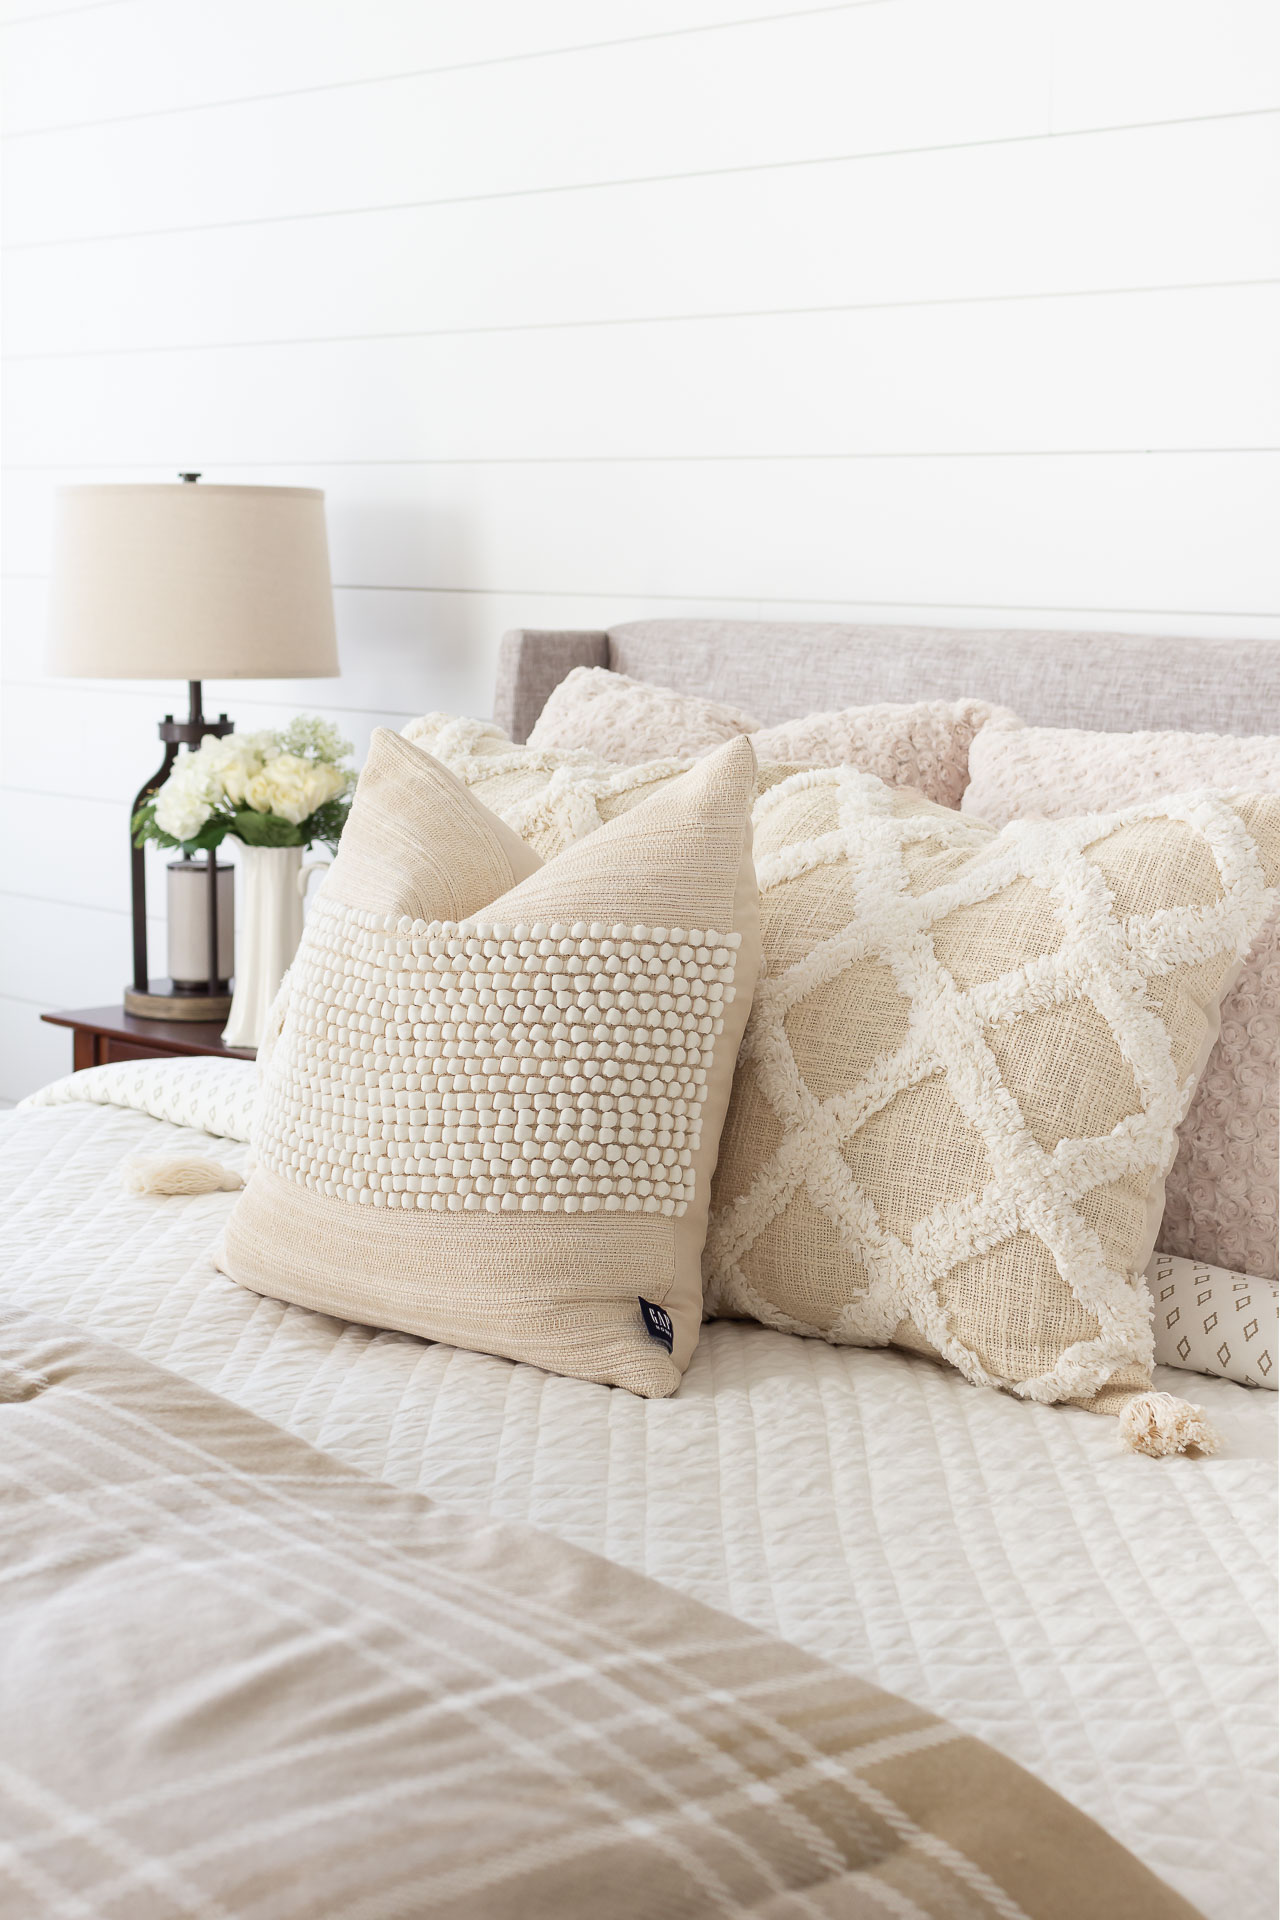 https://www.onsuttonplace.com/wp-content/uploads/2021/12/neutral-pillows-on-bed.jpg